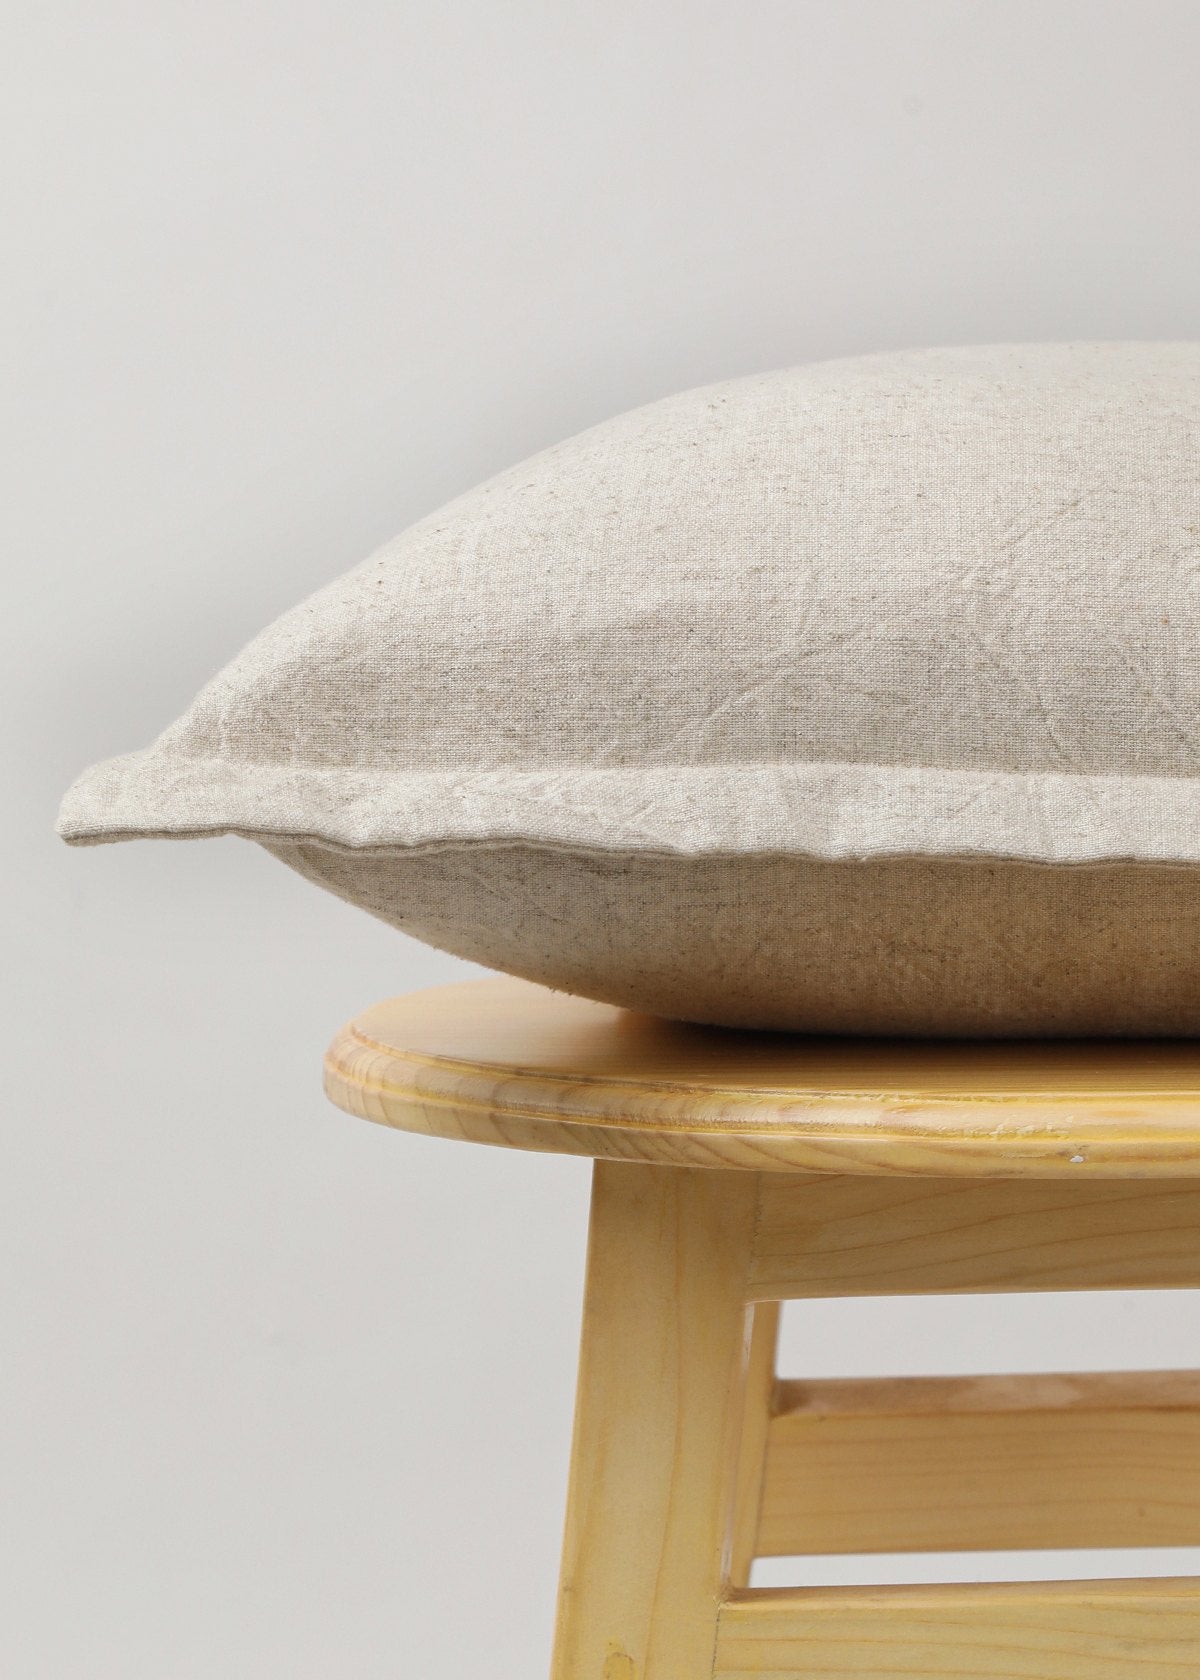 Solid Linen Cushion Cover - Beige